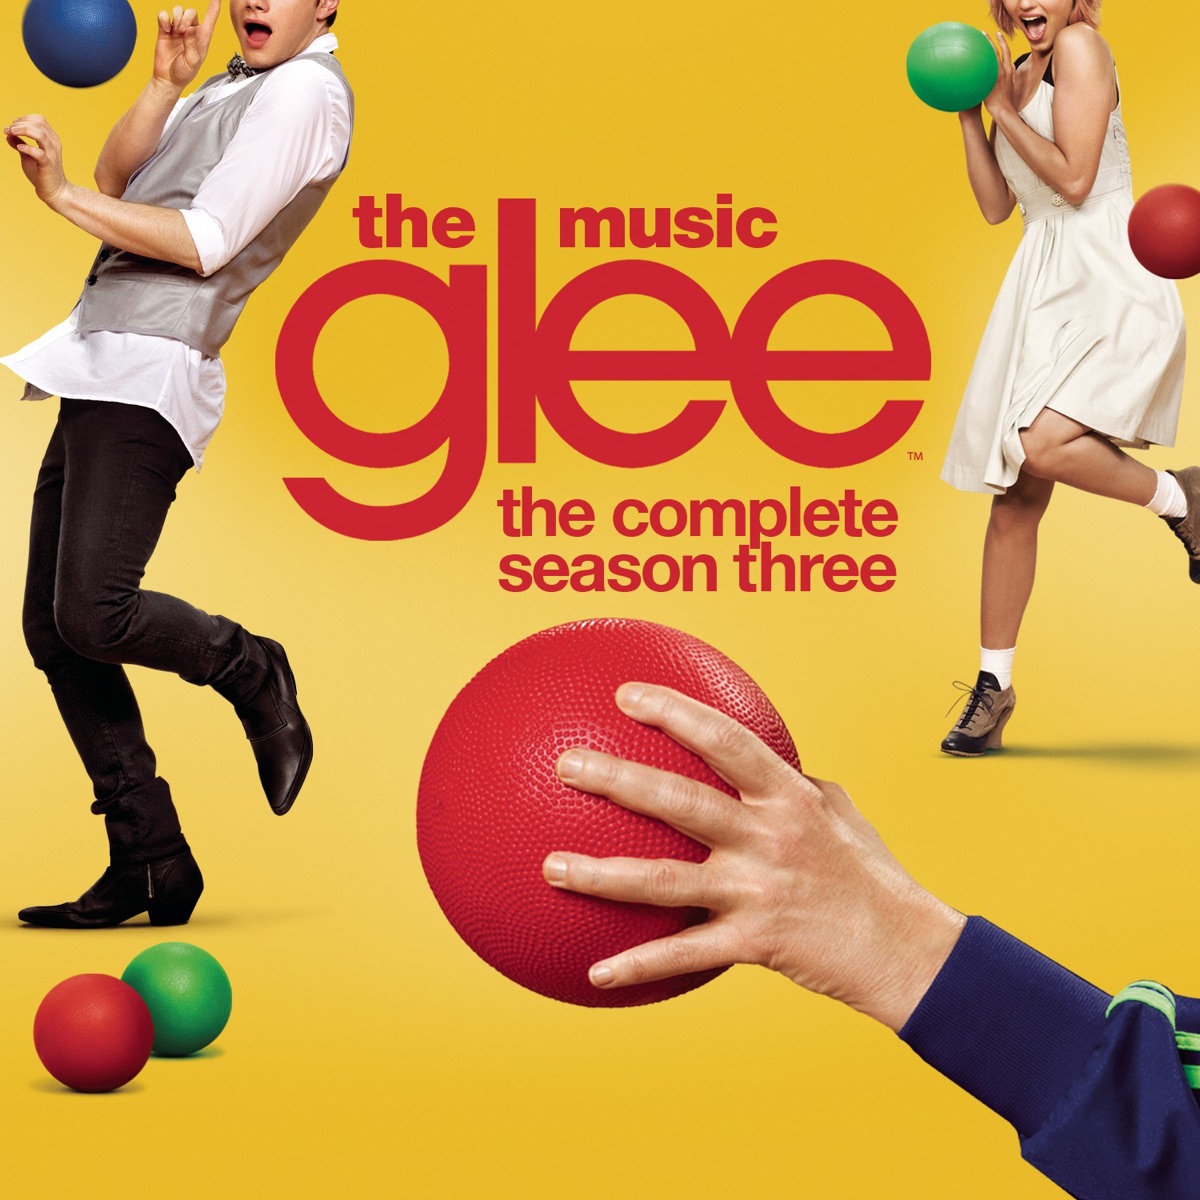 Glee: The Music - The Complete Season Four - Album by Glee Cast - Apple  Music